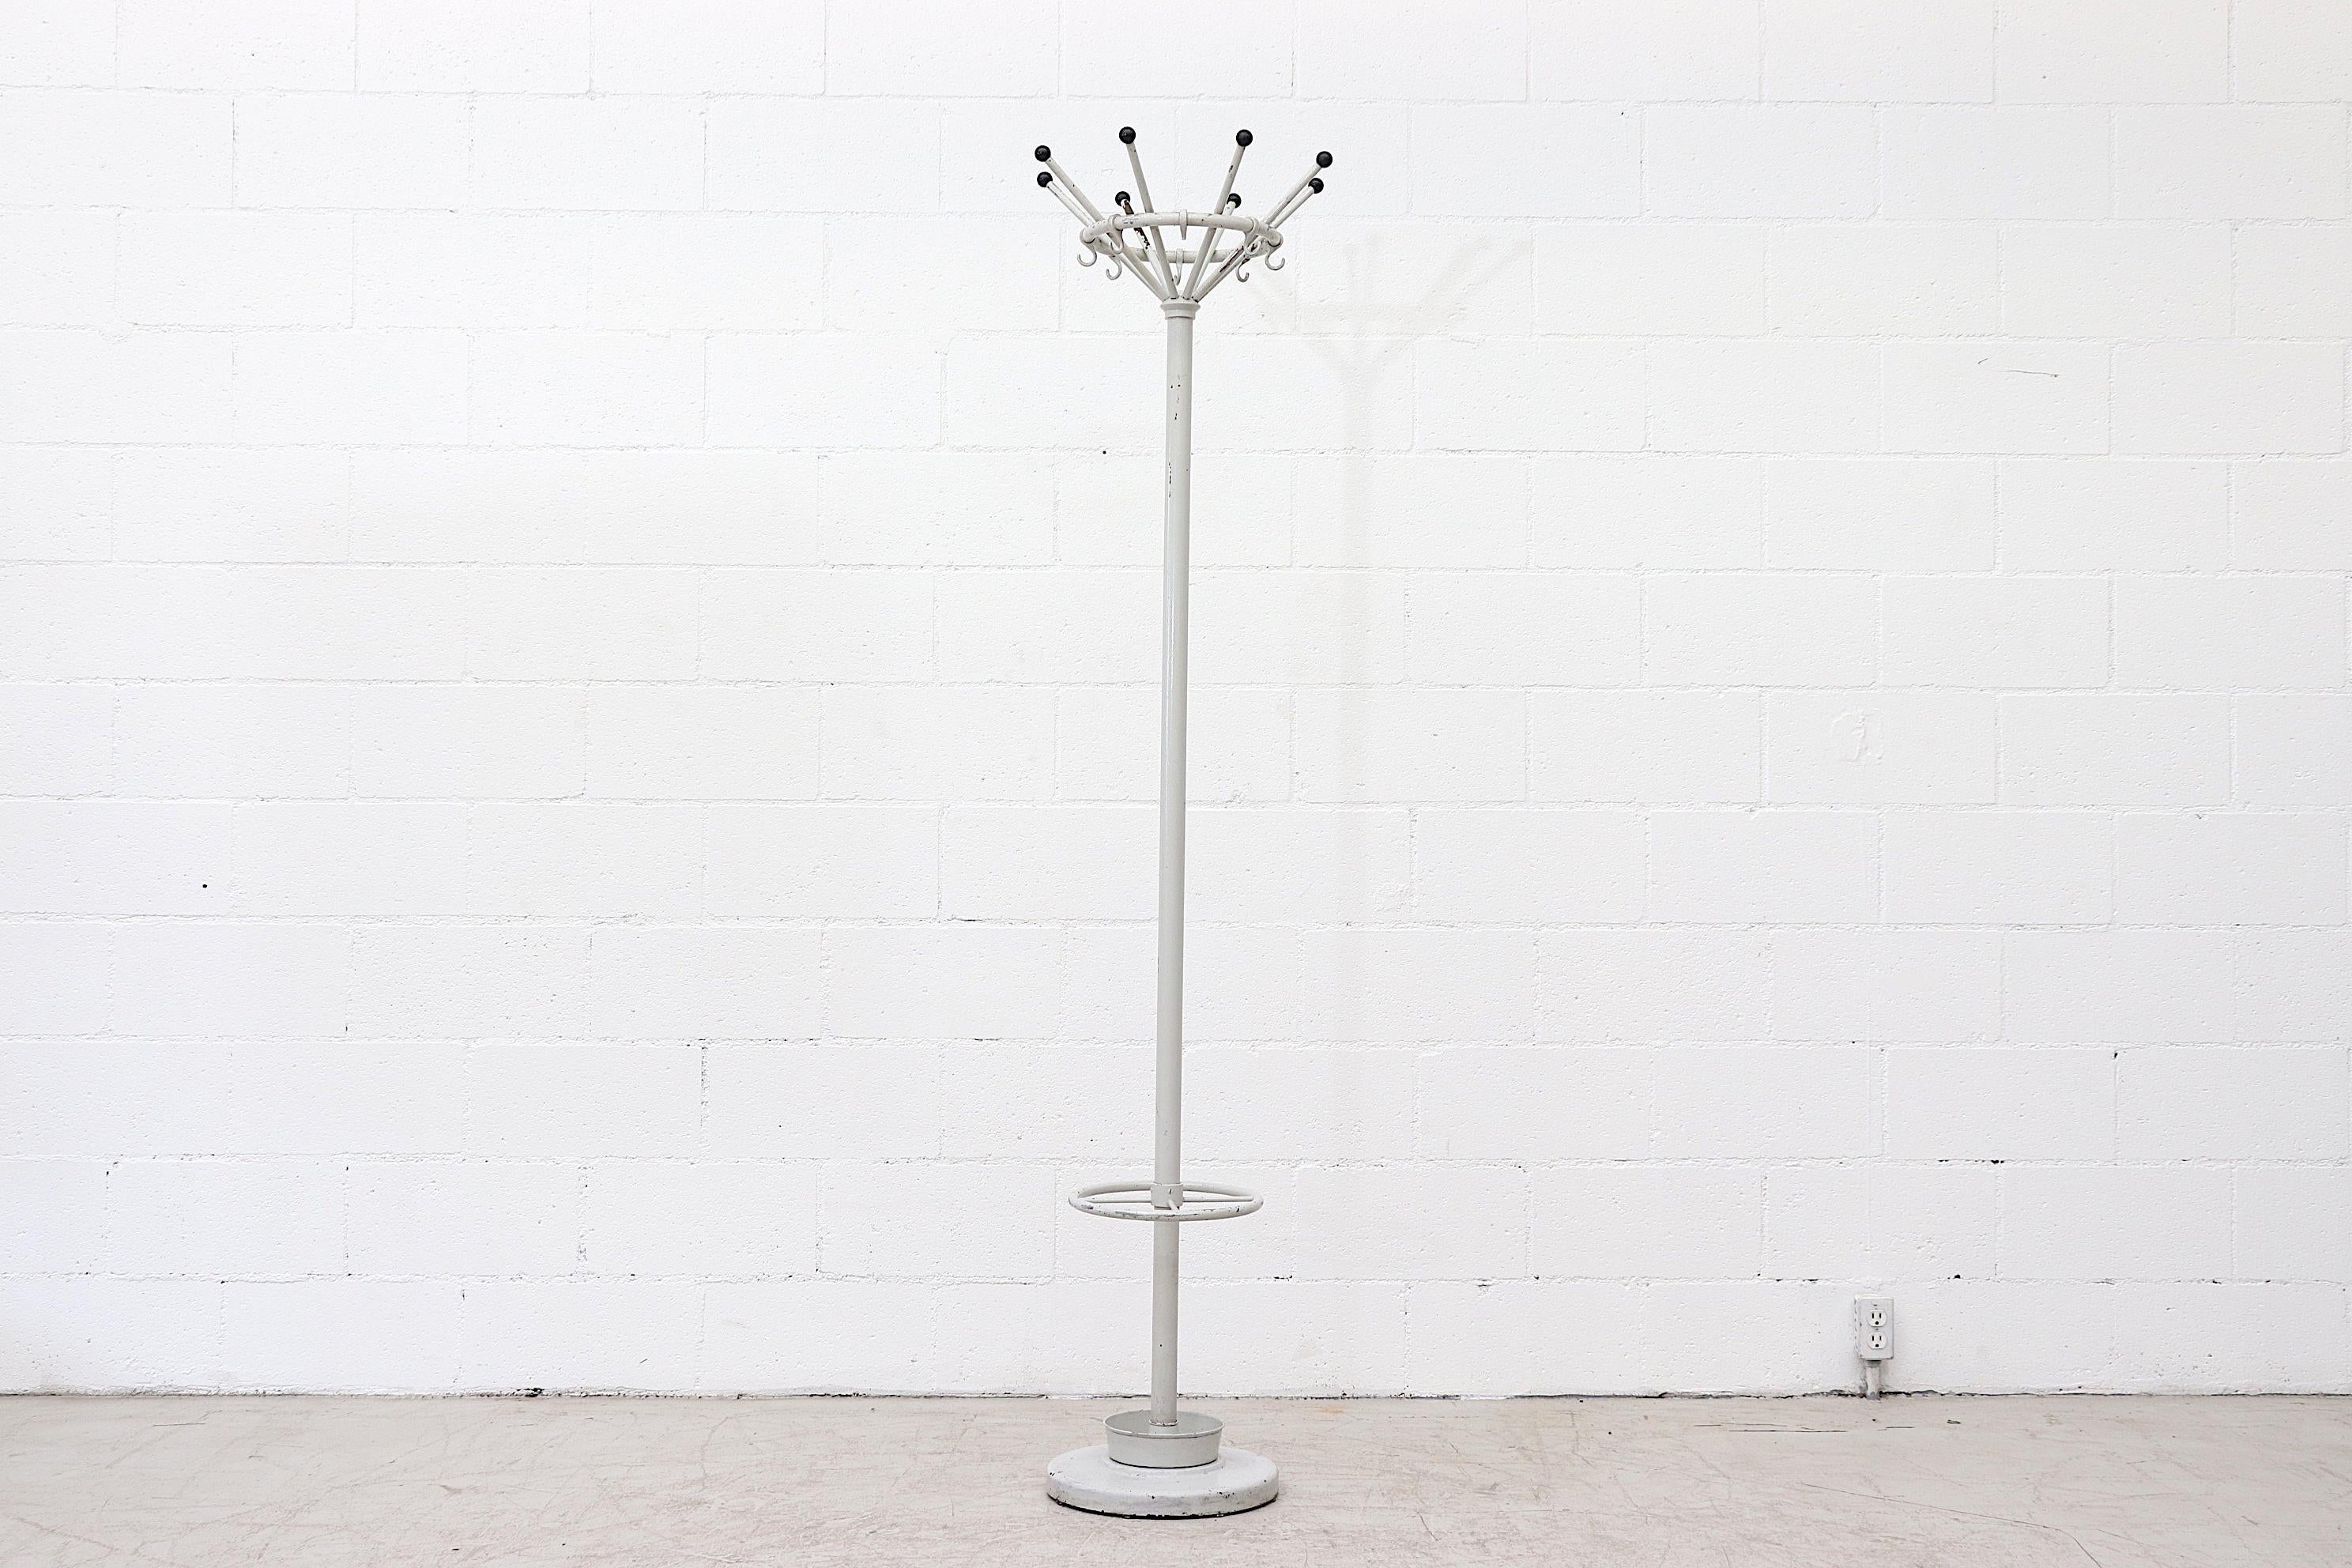 Gispen light grey enameled metal coat rack with weighted base and umbrella holder. 8 tubular arms with black synthetic knobs for coats and hats. In original condition with some rust and wear consistent with its age and use and 1 broken hook.